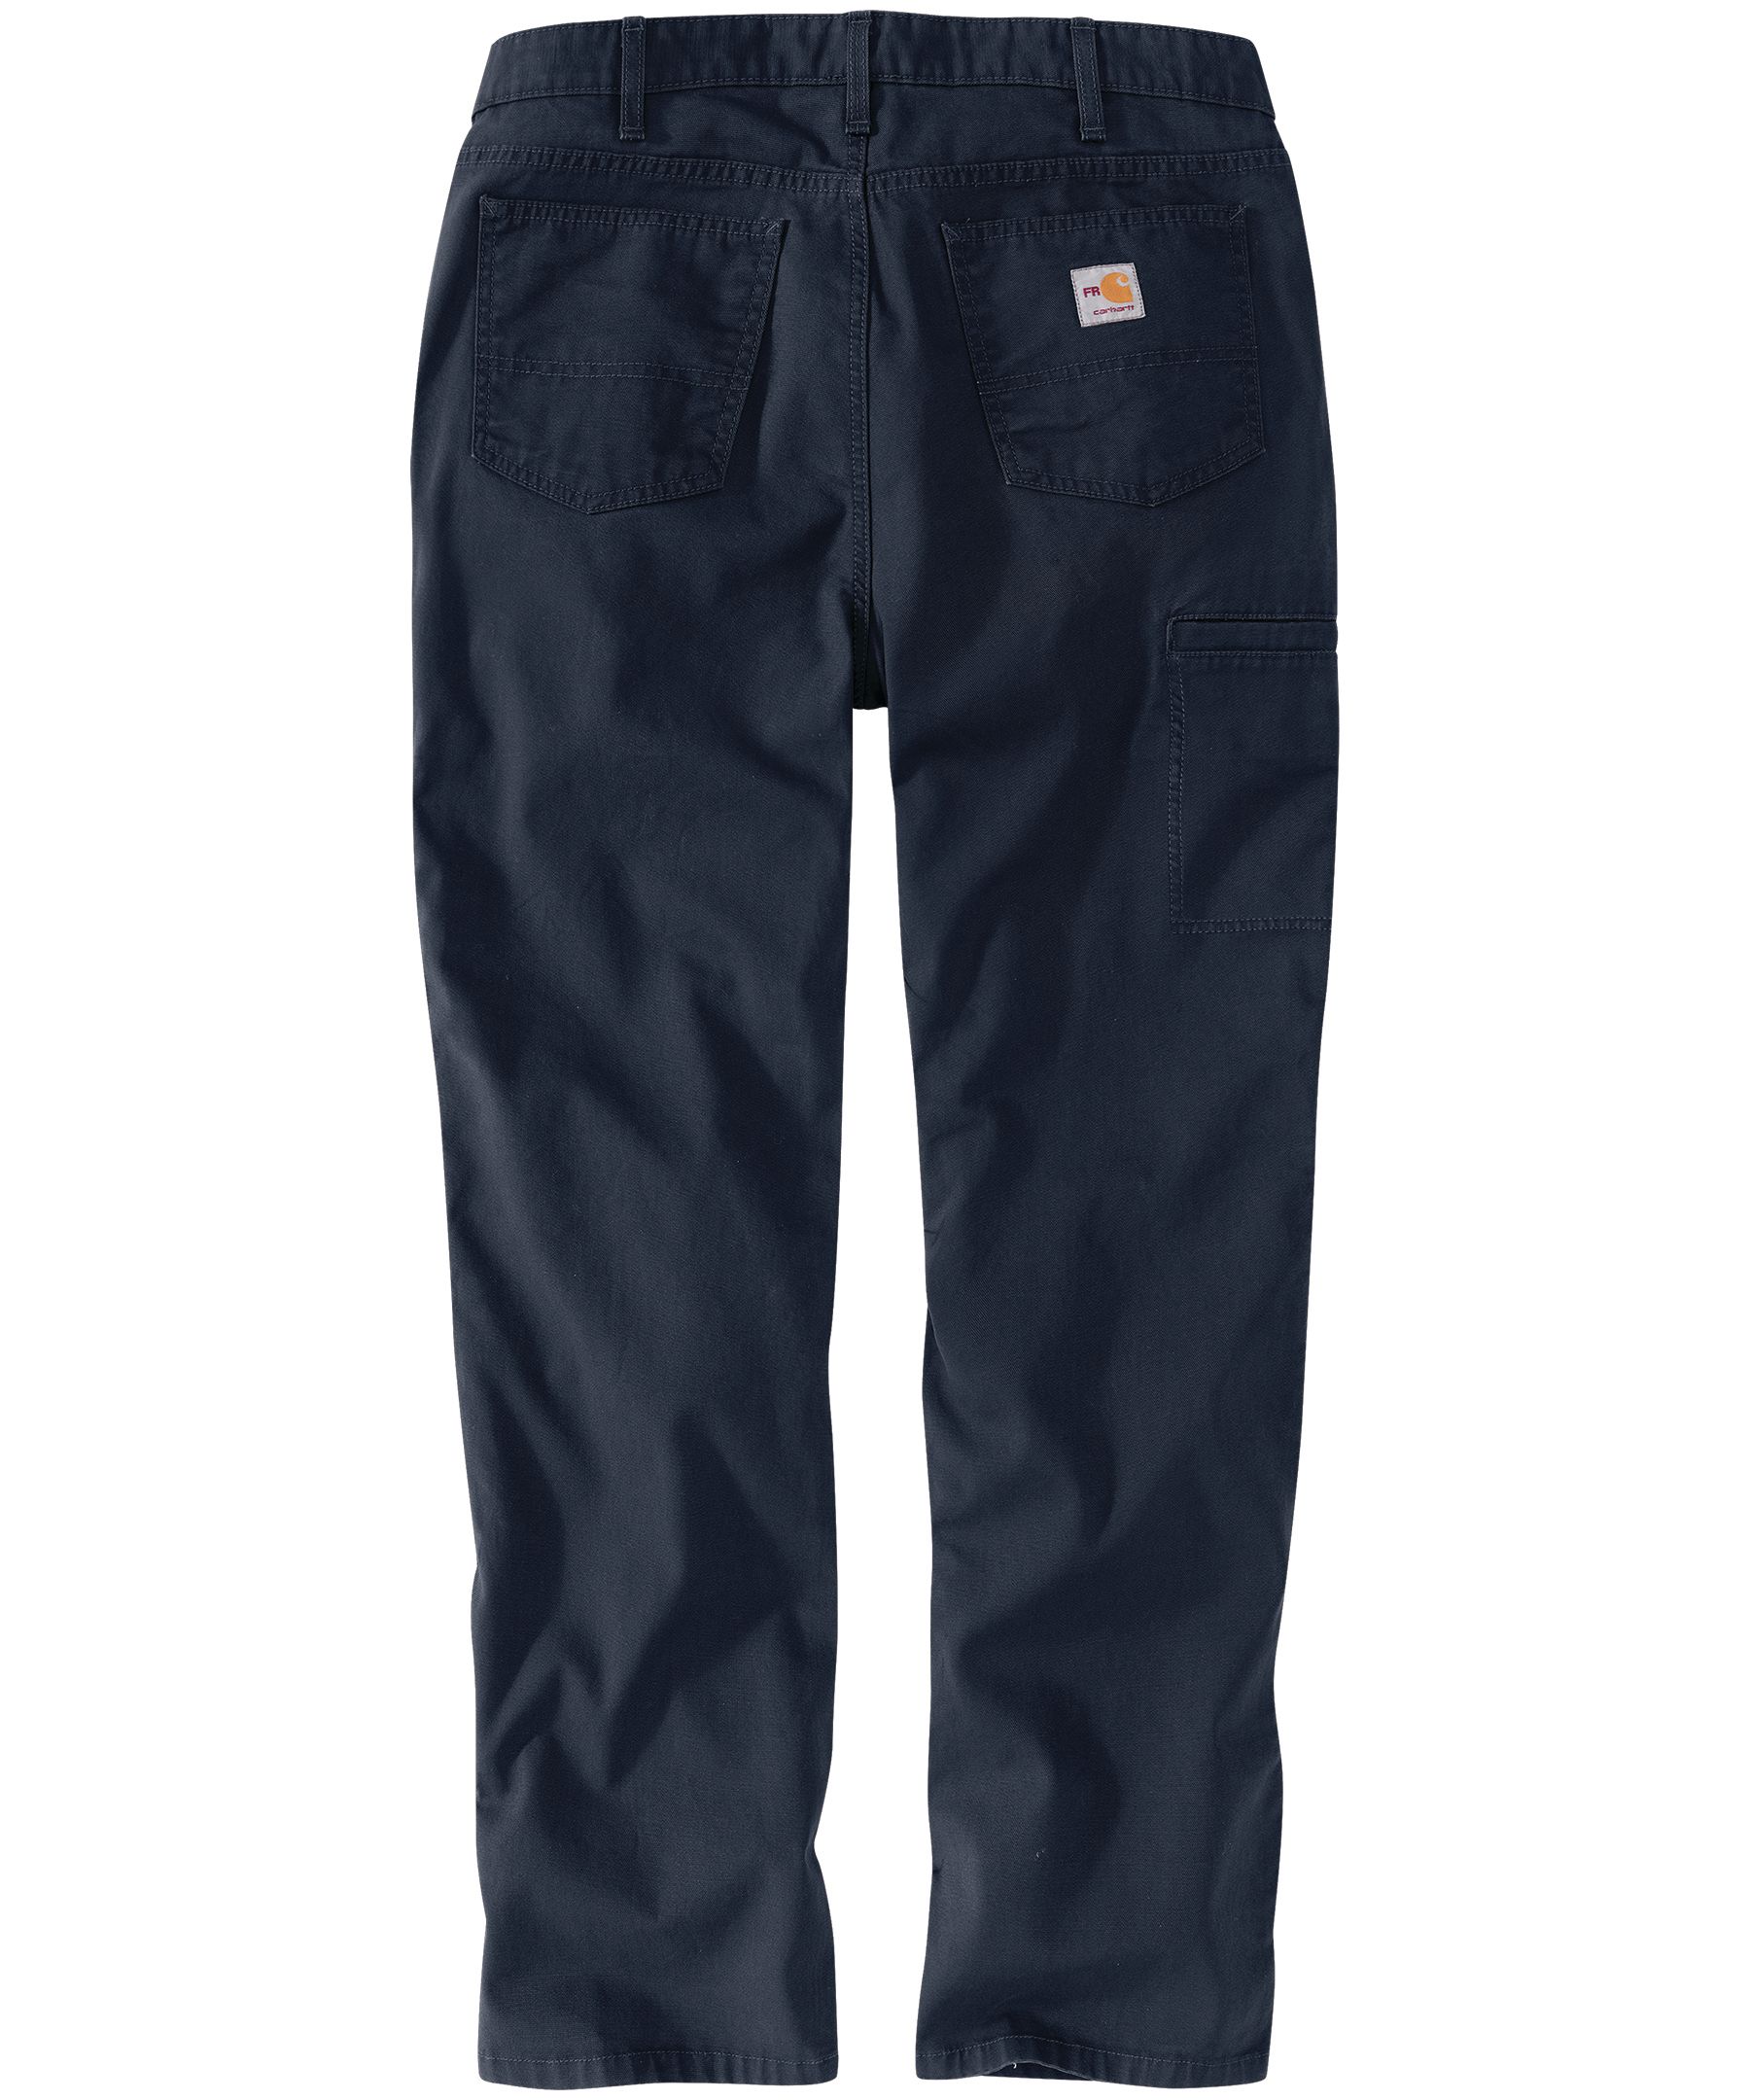 https://media-www.marks.com/product/marks-work-wearhouse/industrial-world/workwear/410033841738/carhartt-women-s-flame-resistant-rugged-flex-canvas-work-pants-5403d466-d571-4df8-8bf5-625e5438c09a-jpgrendition.jpg?imdensity=1&imwidth=1244&impolicy=mZoom